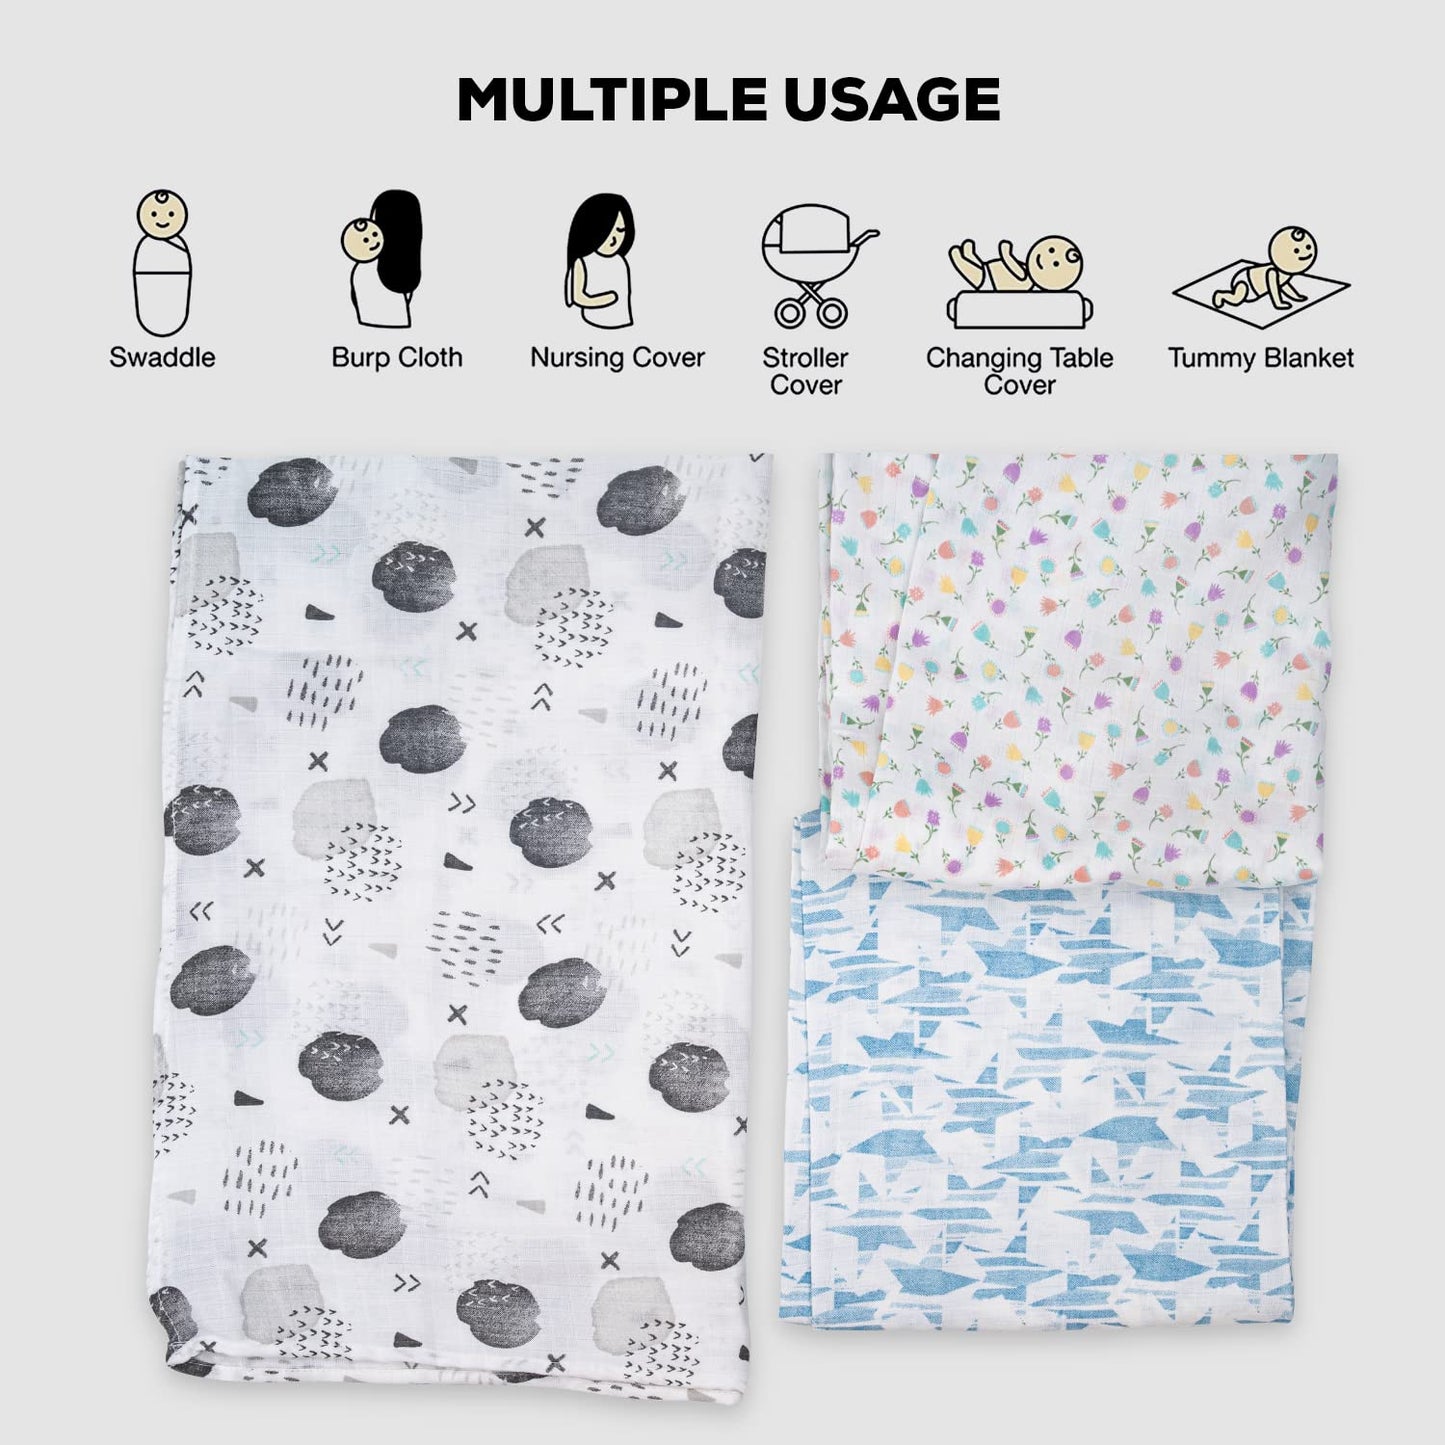 BAYBEE 100% Cotton Muslin Baby Swaddle Wrapper Blanket for New Born (Pack of 3)